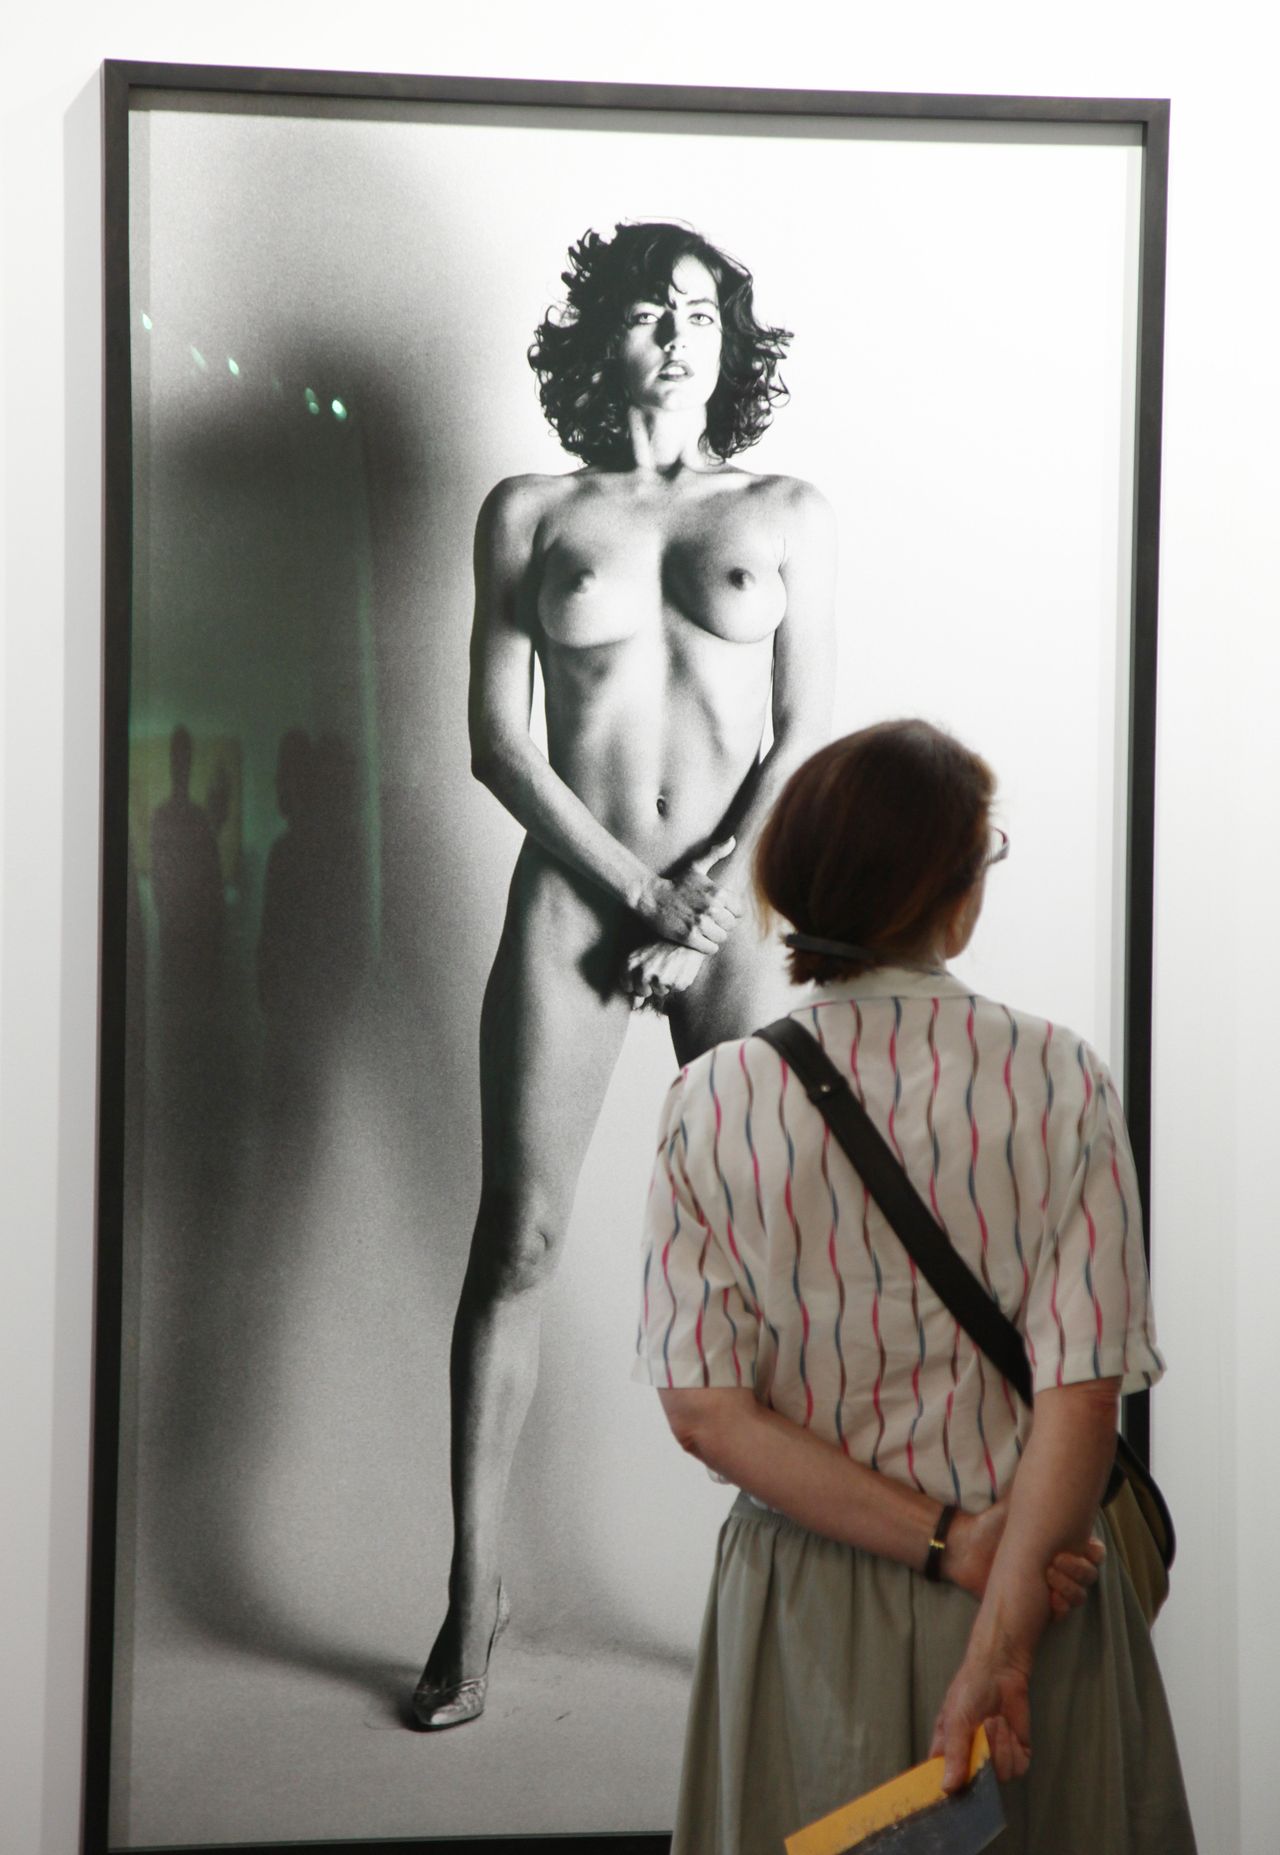 A visitor looks at a photo by Helmut Newton during the VIP opening at Art Basel on June 17, 2015 in Basel, Switzerland. (Michele Tantussi/Getty Images)